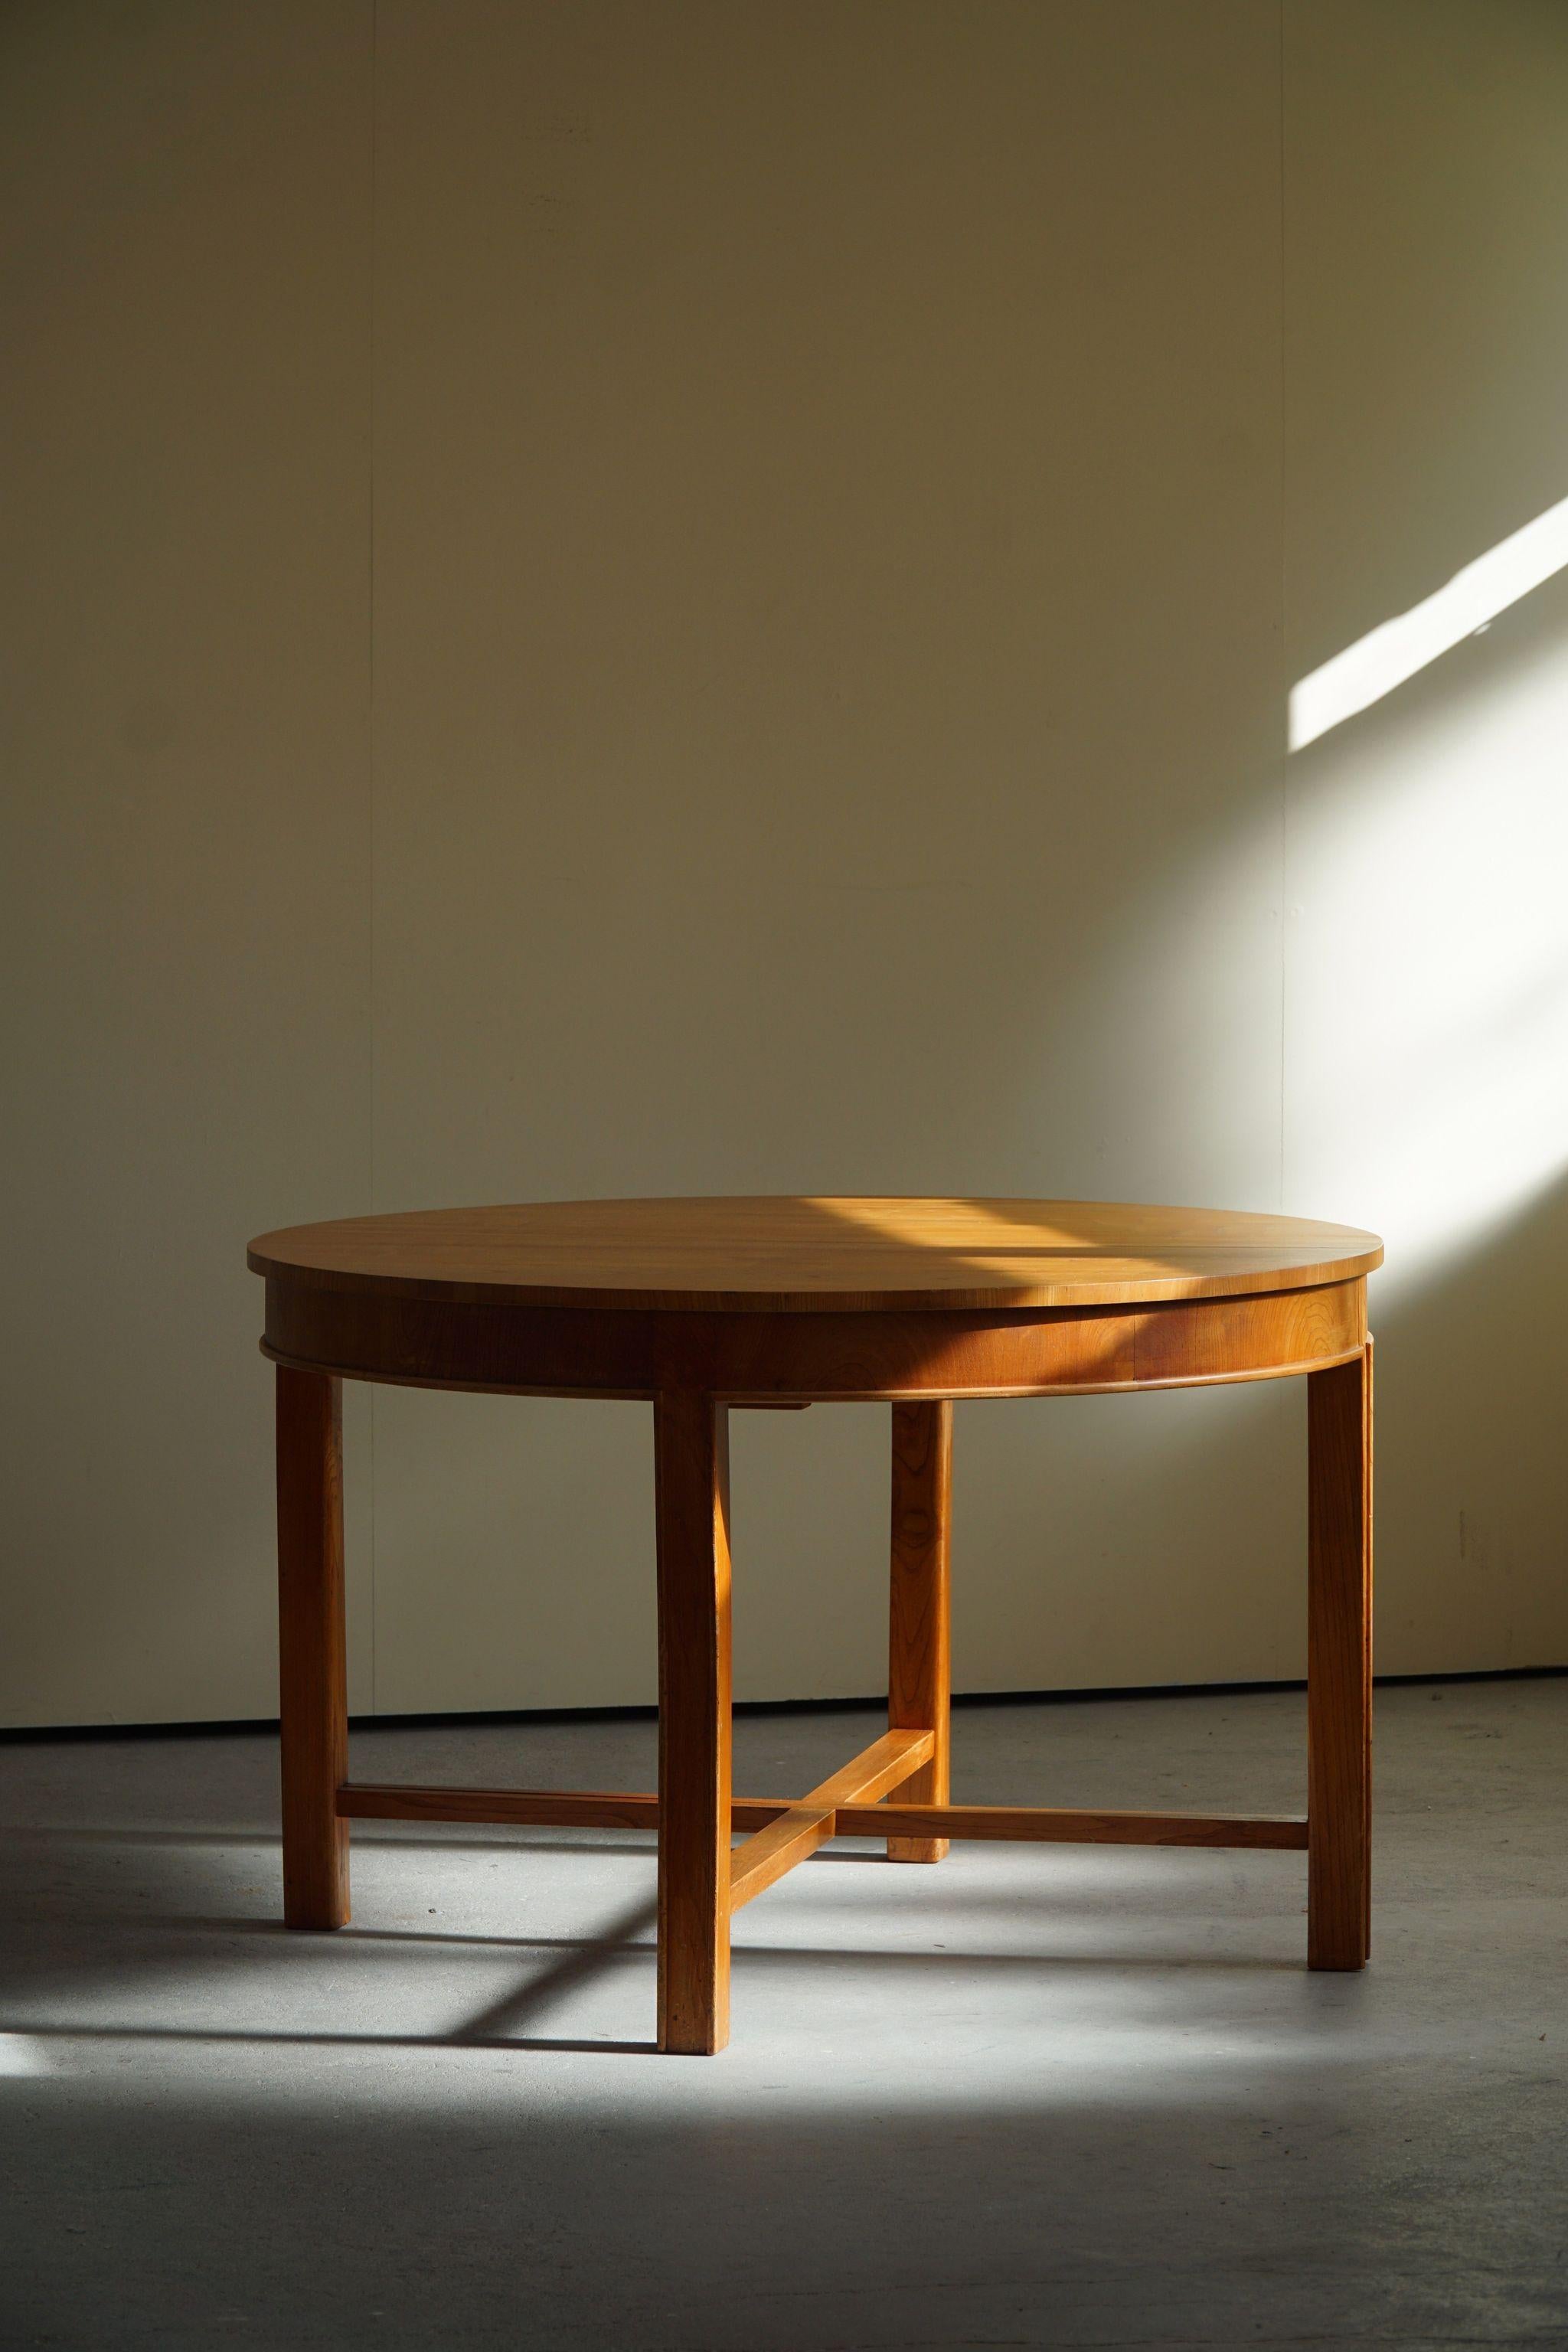 20th Century Round Dining Table in Elm Wood with Four Extensions, Danish Cabinetmaker, 1950s